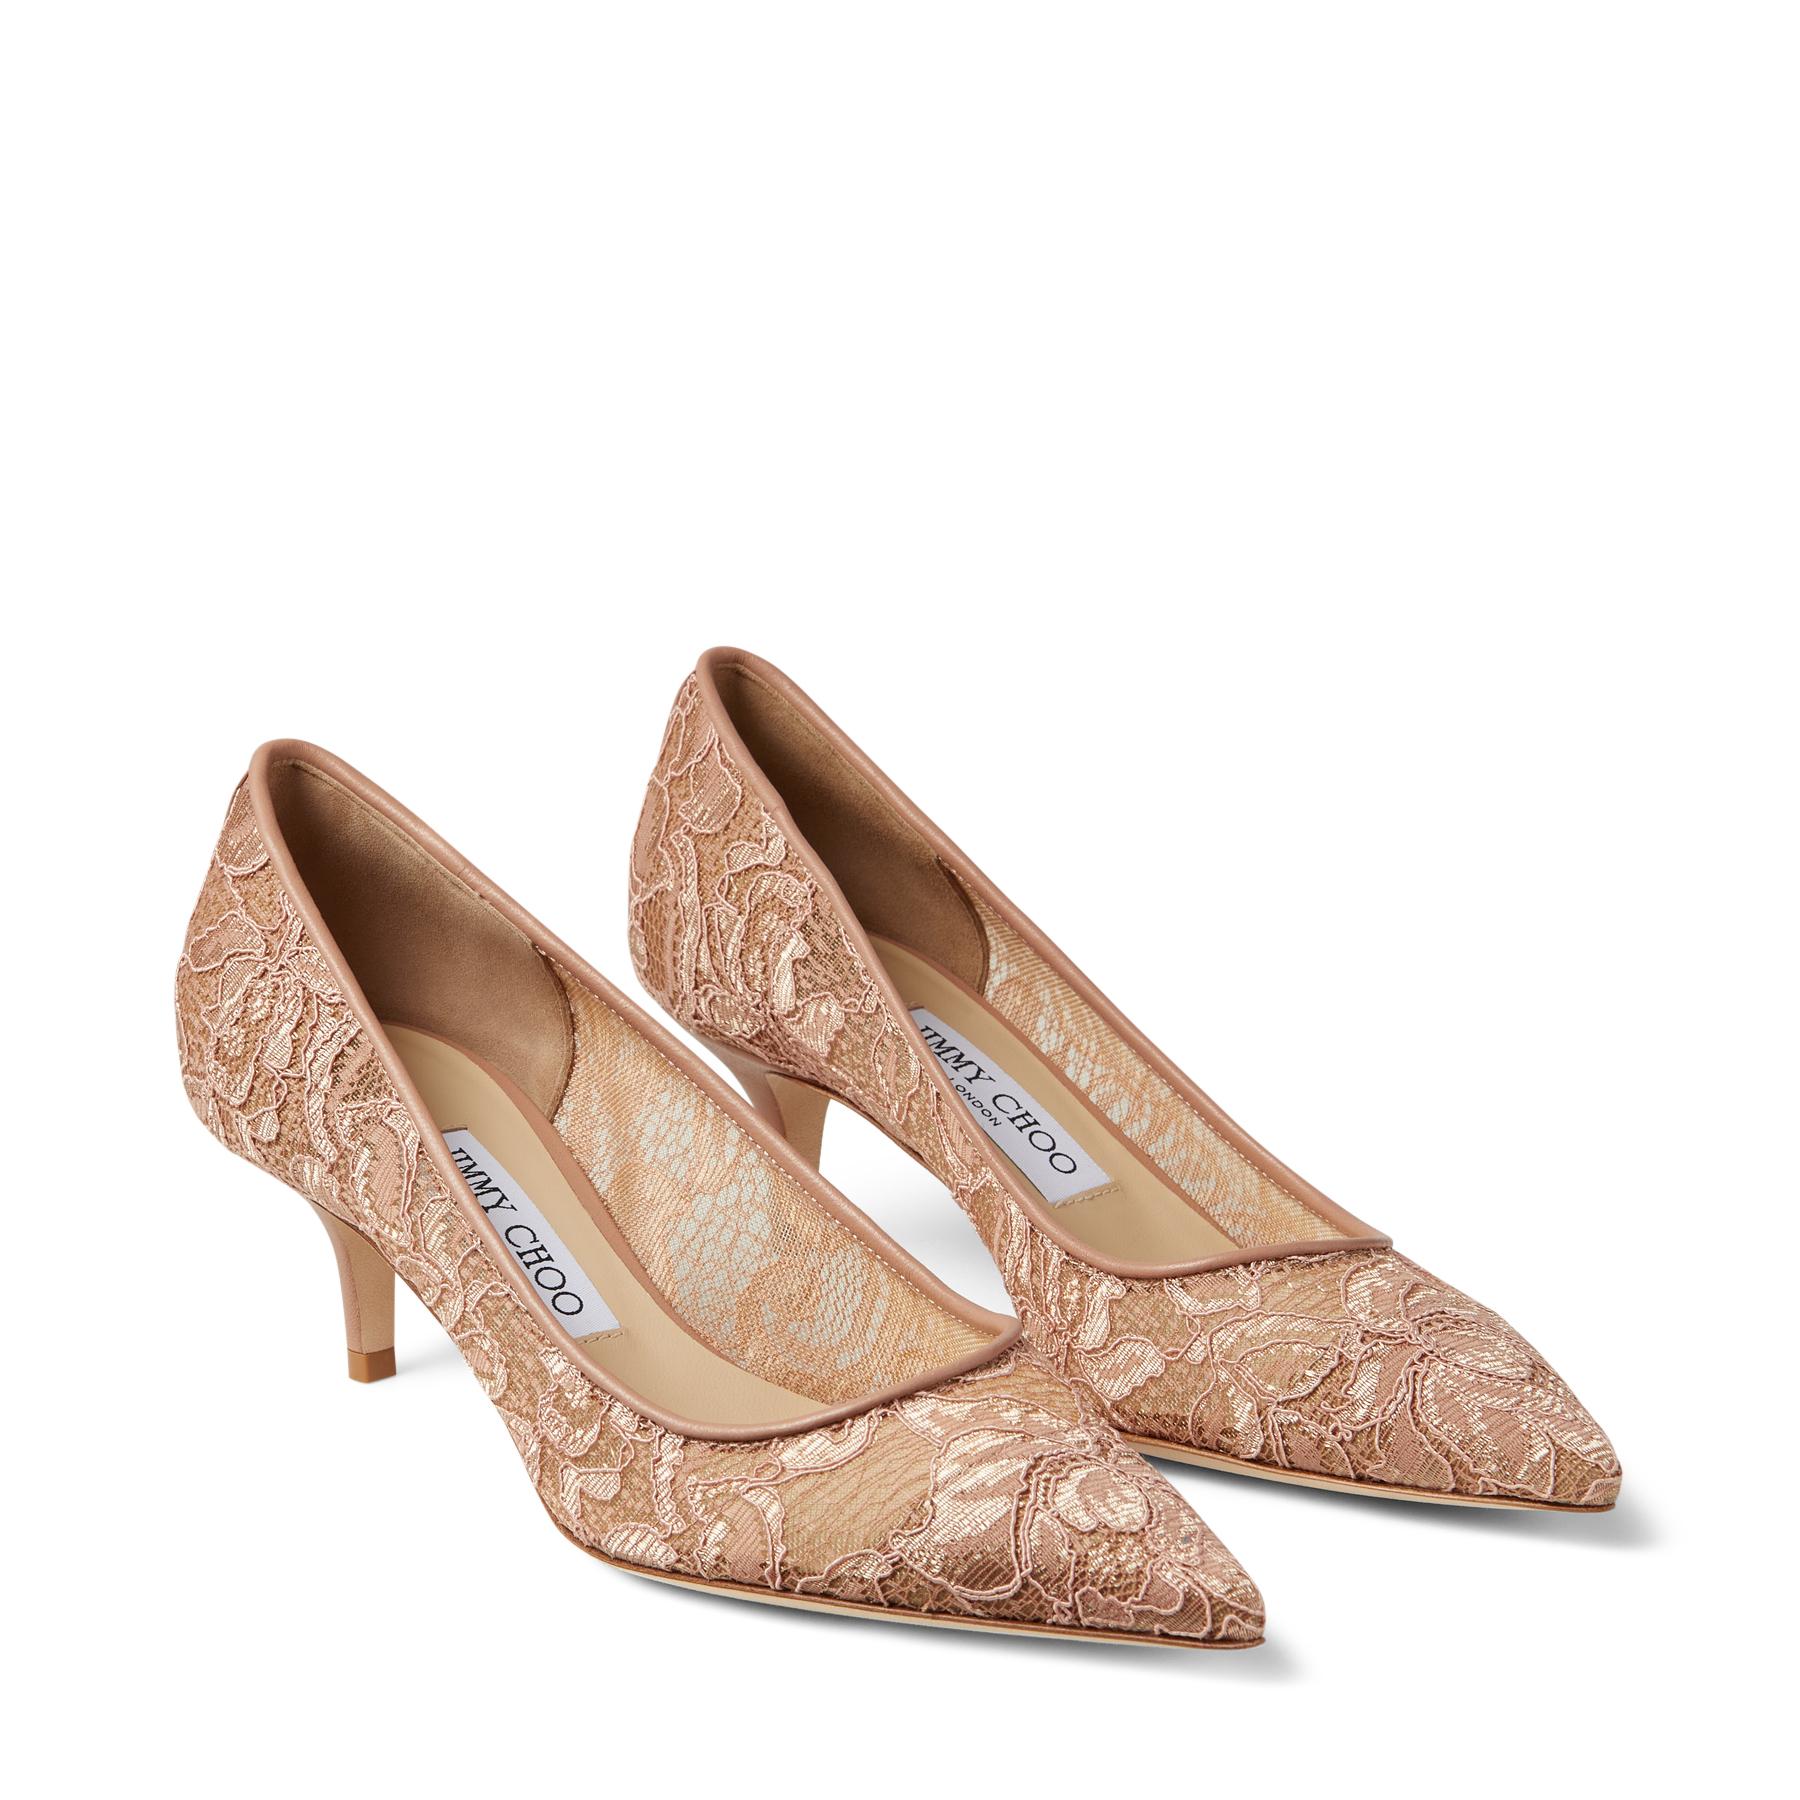 Jimmy Choo Lace Aza in Powder Pink (Pink) - Lyst